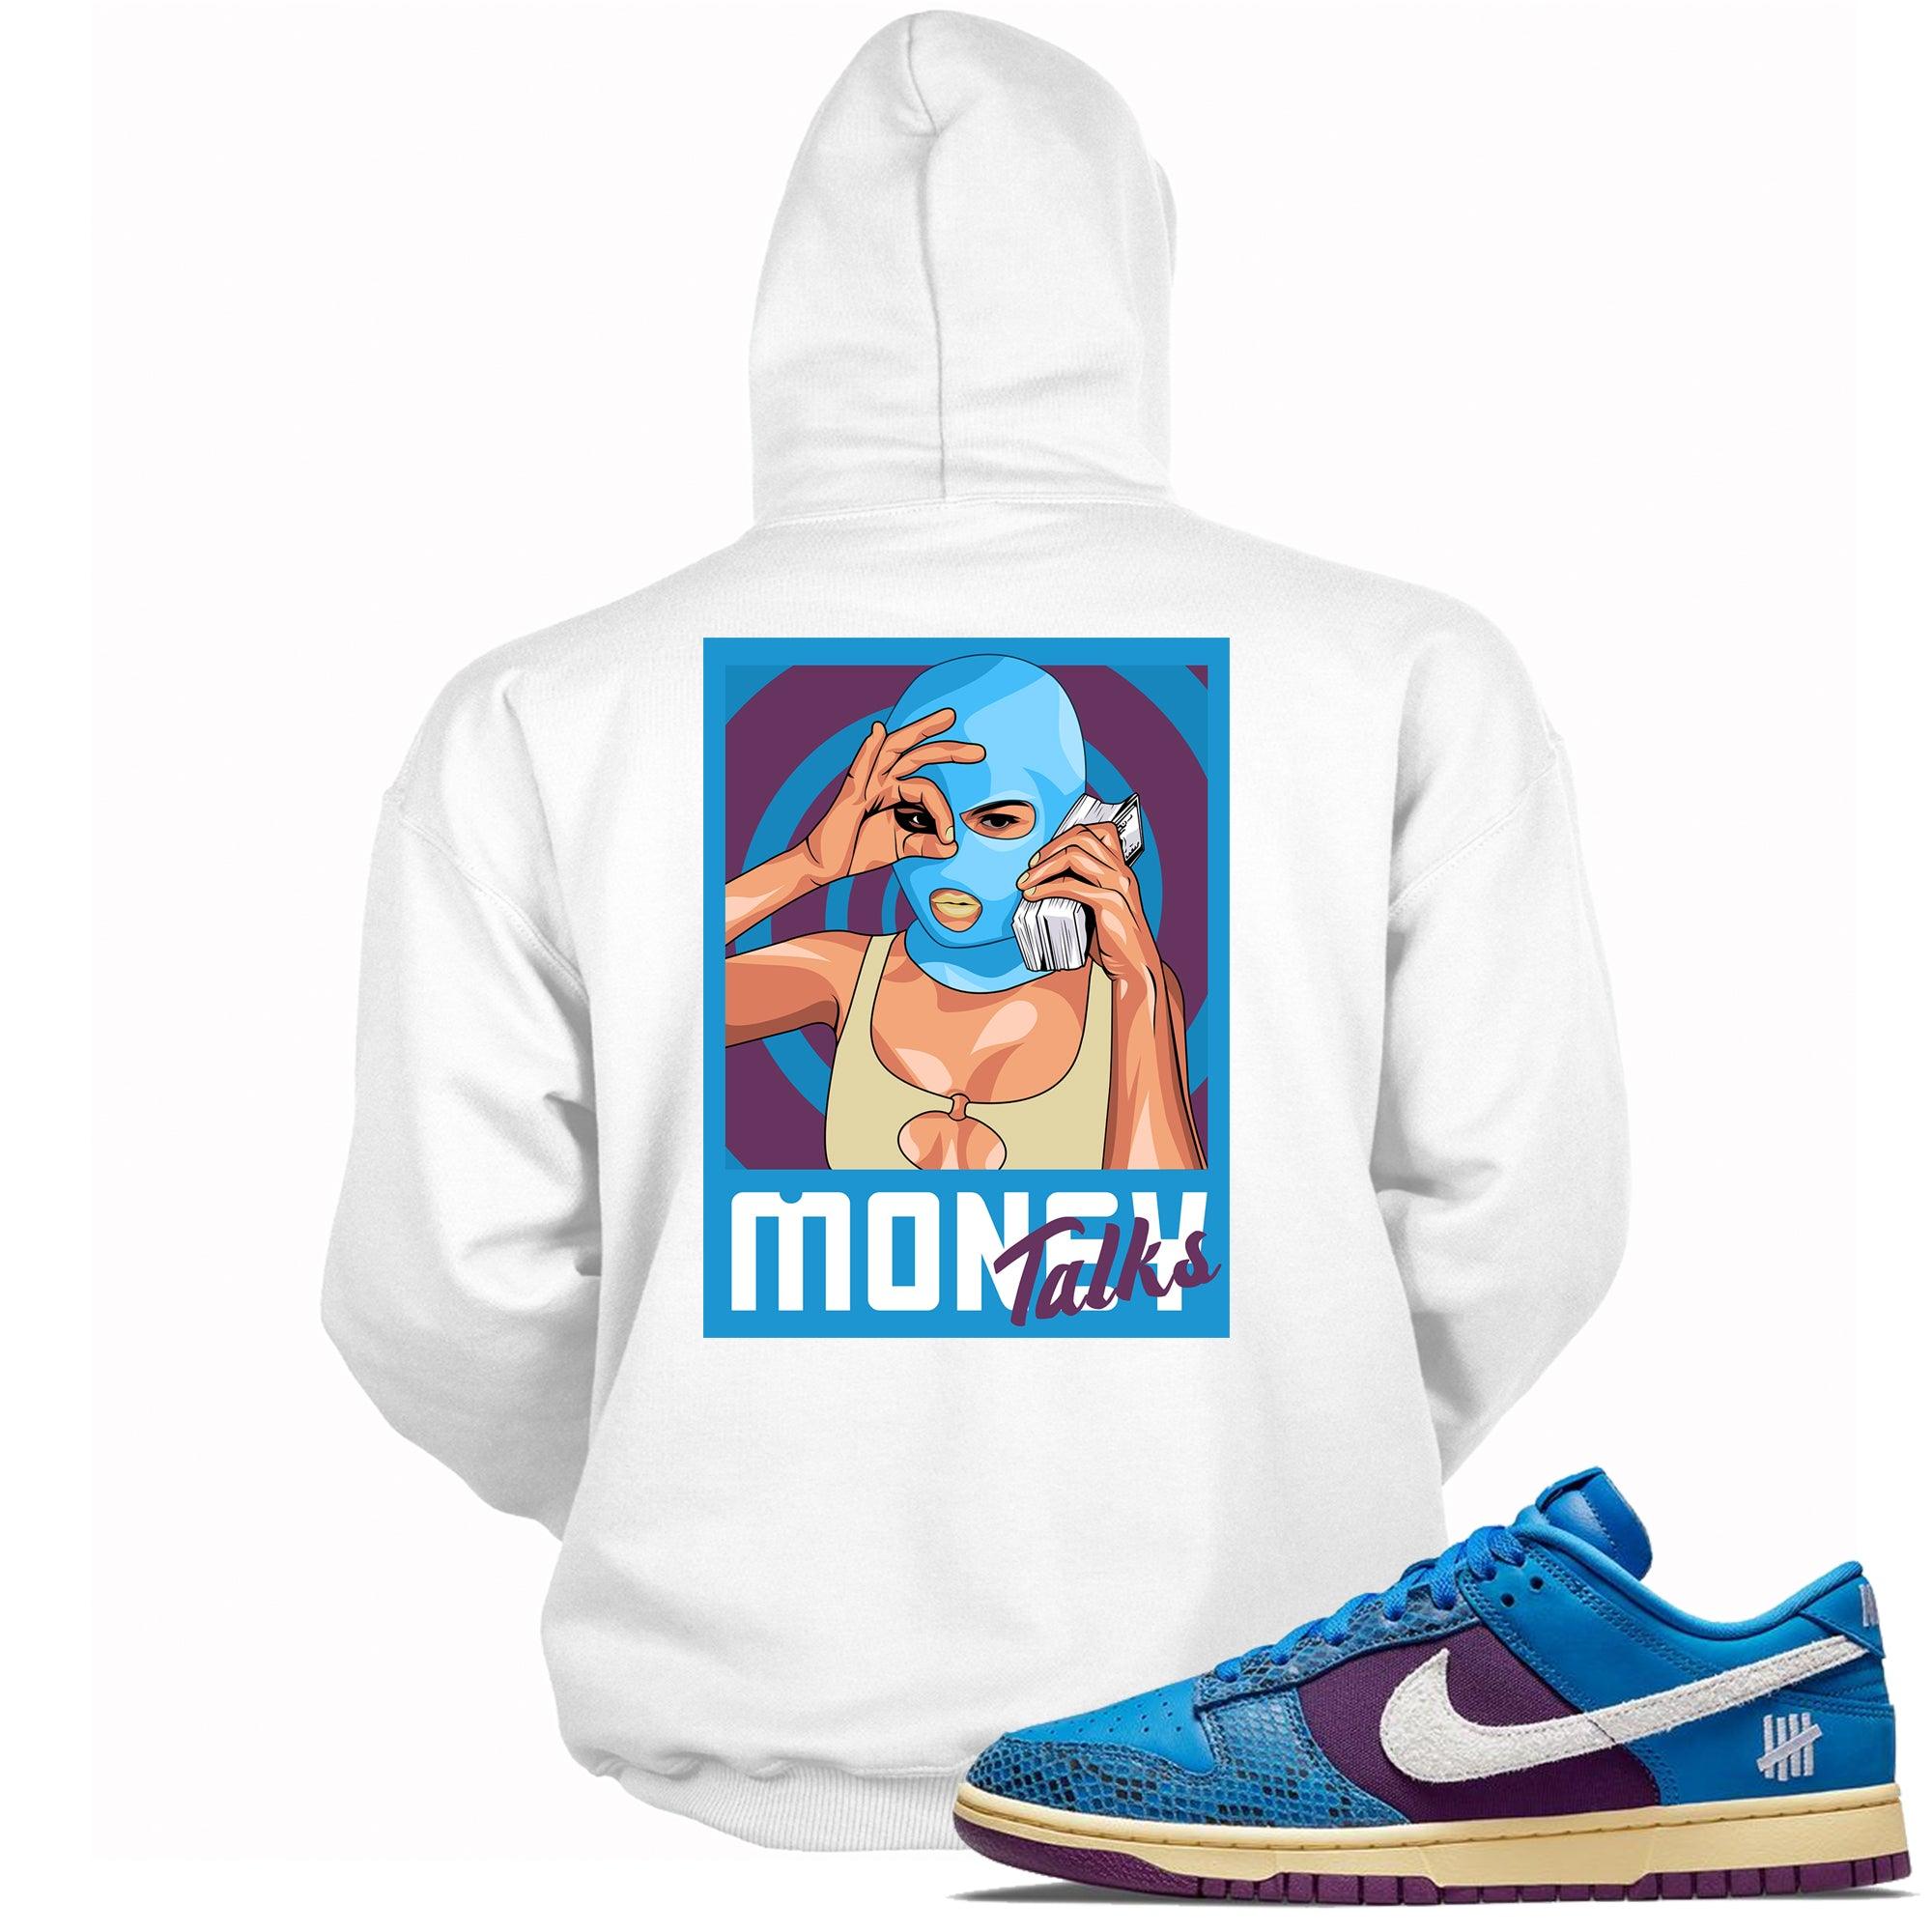 Money Talks Hoodie Nike Dunk Low Undefeated 5 On It Dunk vs AF1 photo